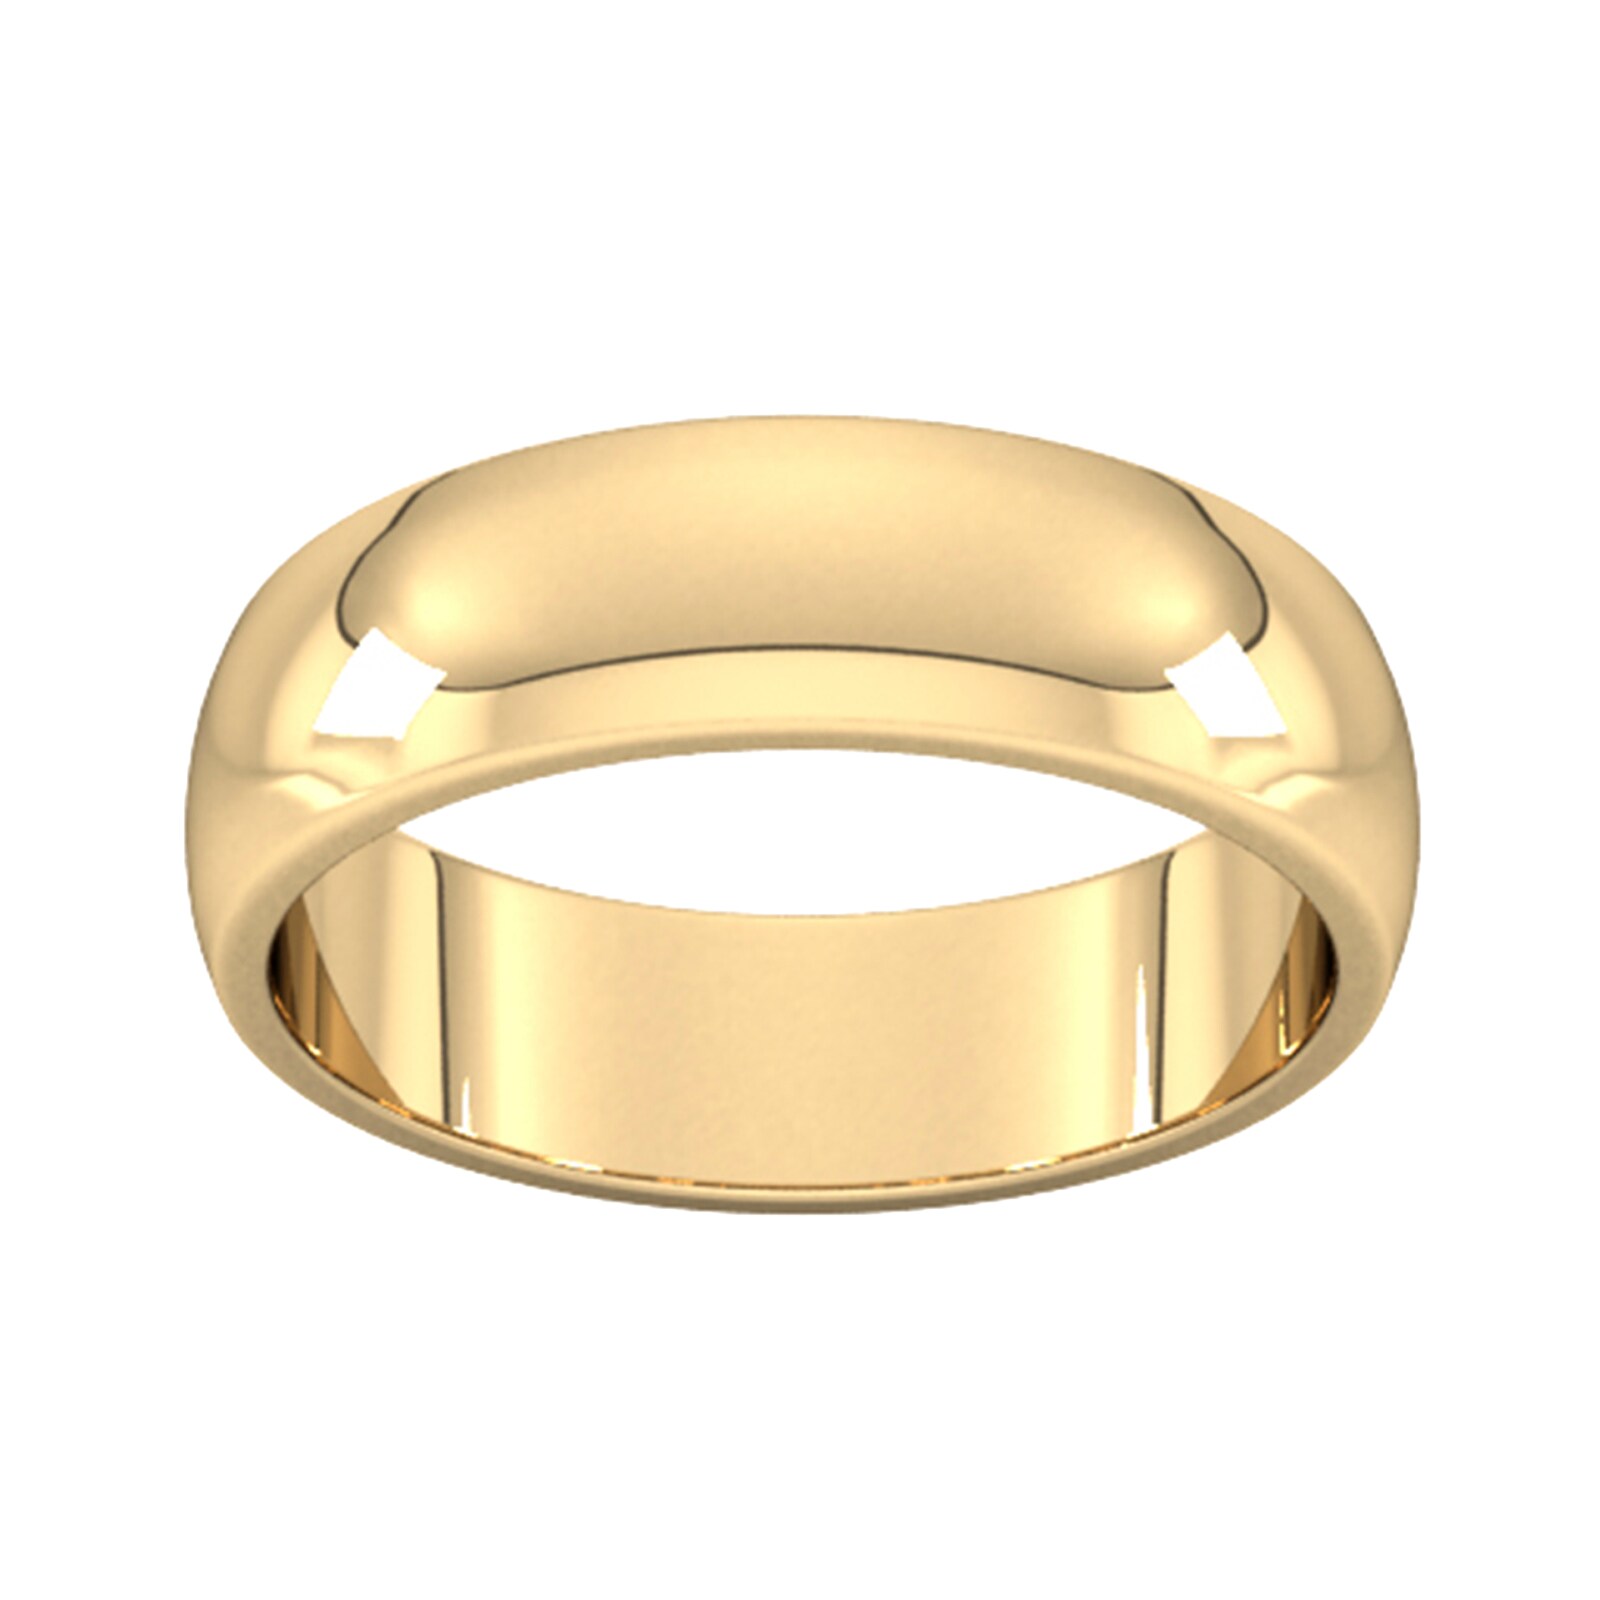 6mm D Shape Heavy Wedding Ring In 18 Carat Yellow Gold - Ring Size L